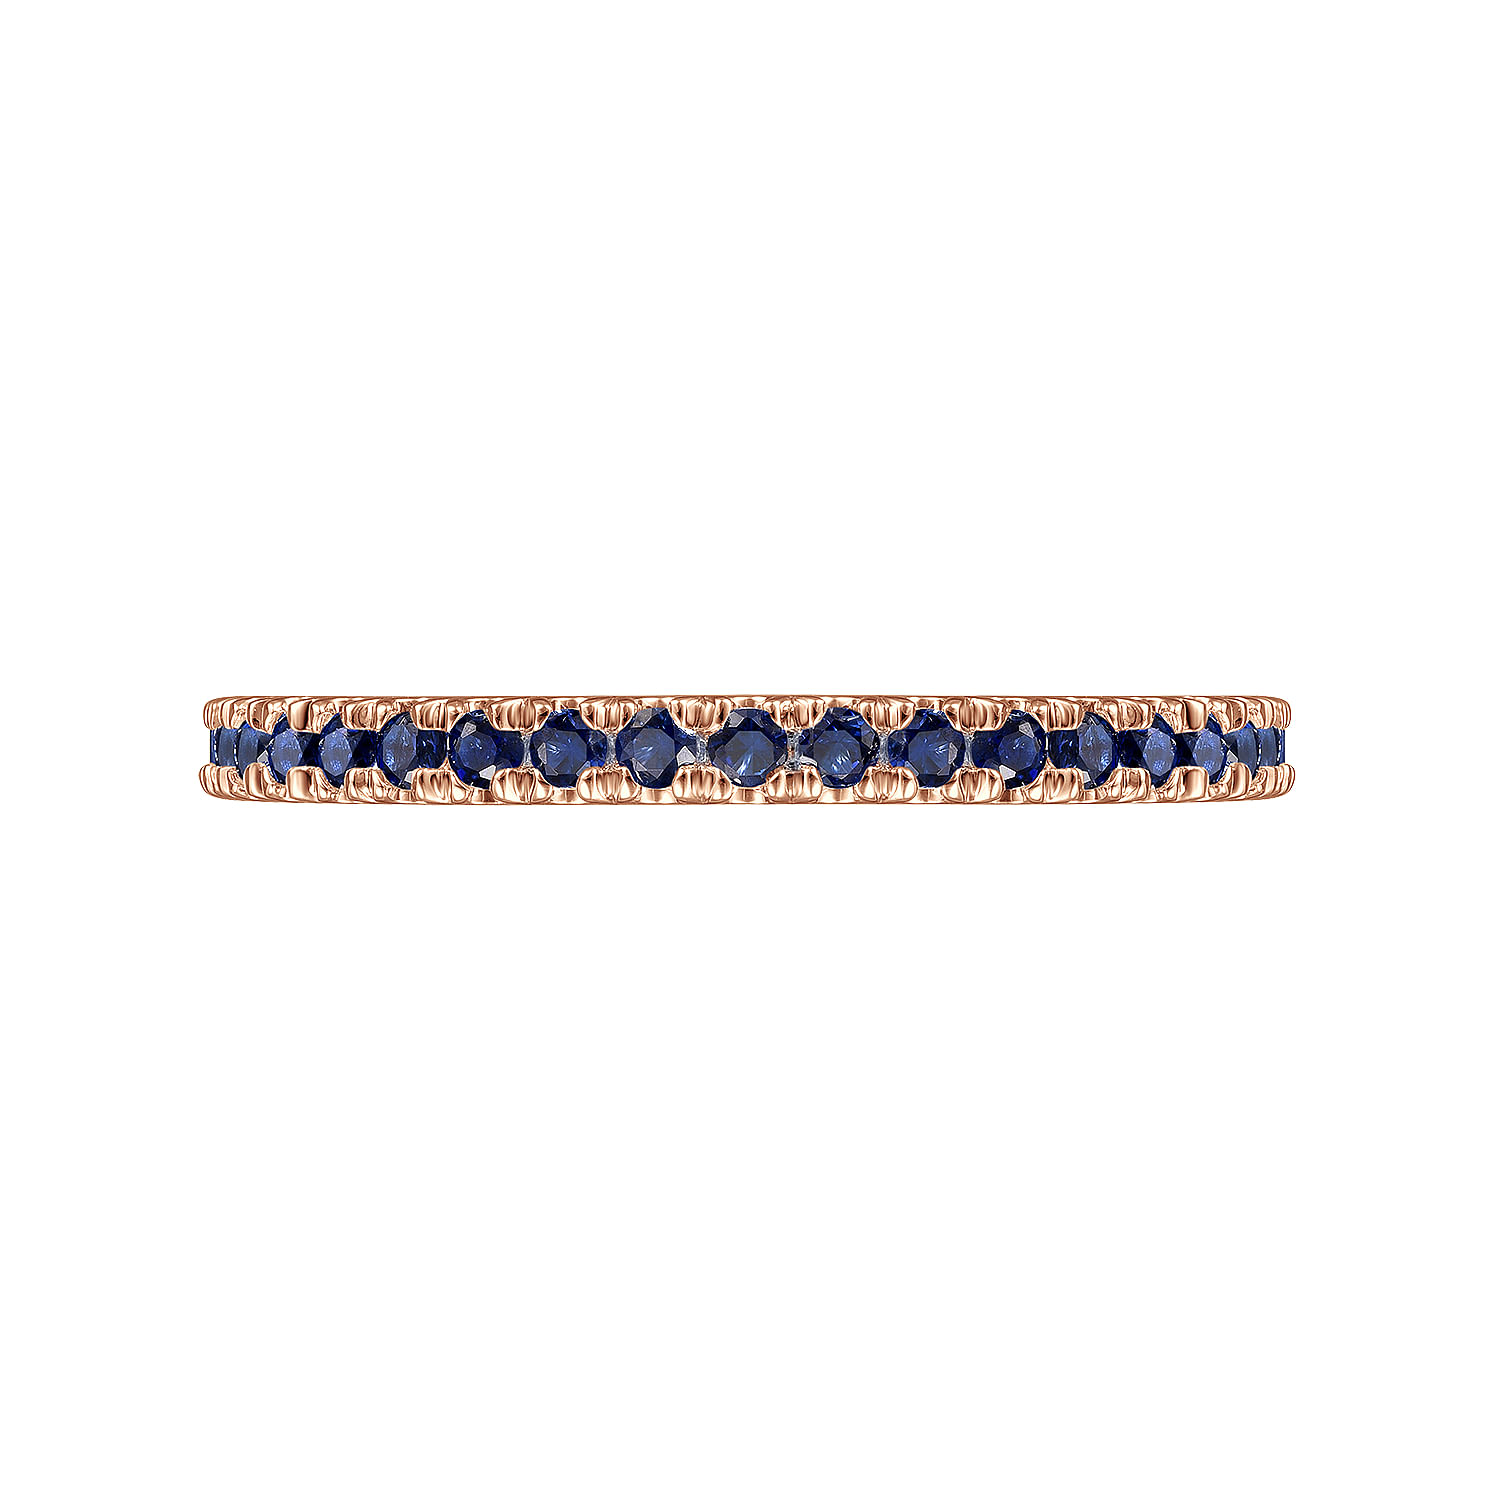 14K Rose Gold Sapphire Stackable Ring